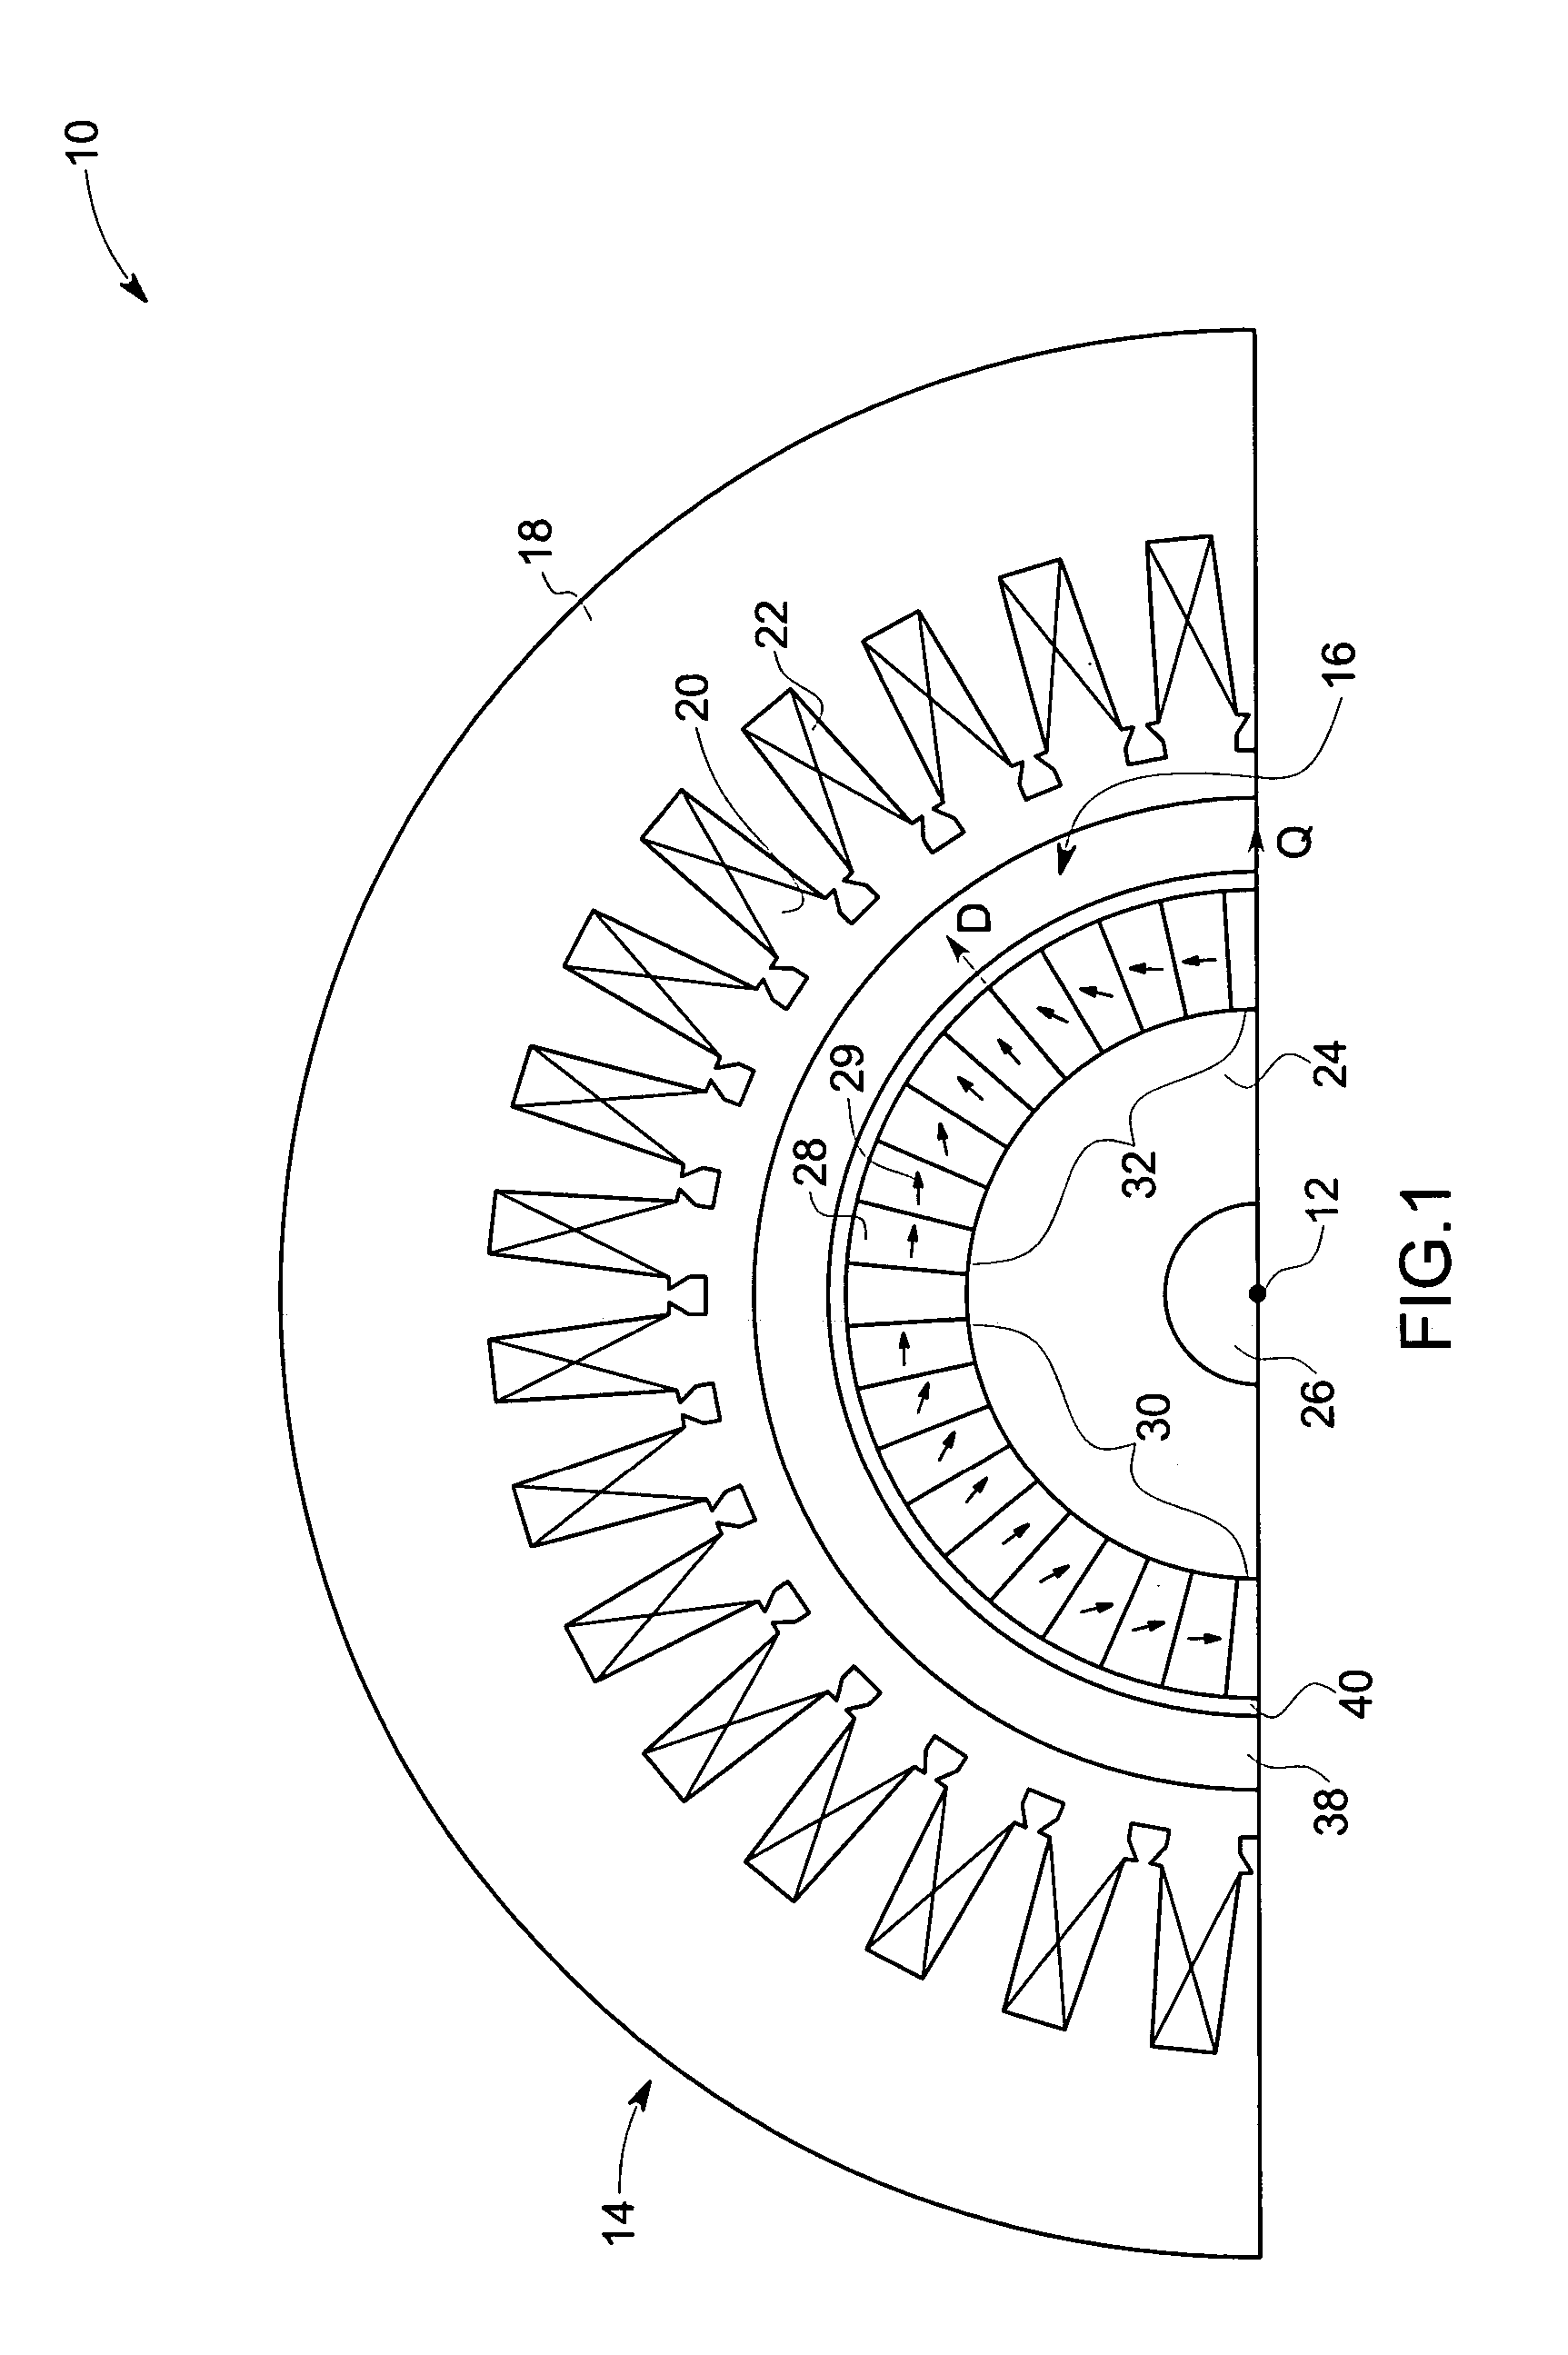 System and method for magnetization of permanent magnet rotors in electrical machines